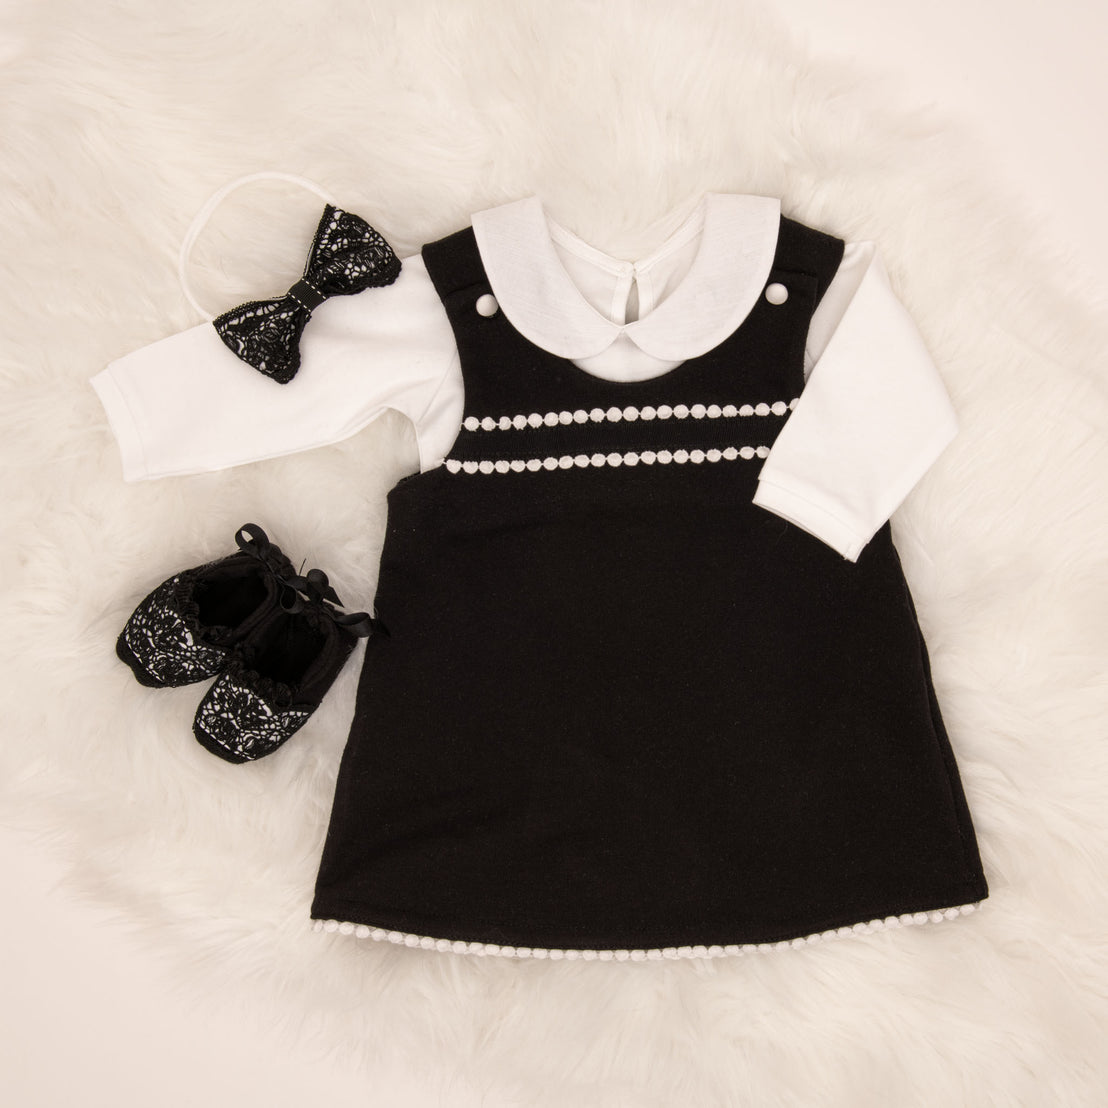 Stylish black and white after-christening June Jumper Dress Set with pearls and sequins, white under-shirt, matching sequined headband, and black sequined shoes laid out on a soft, white